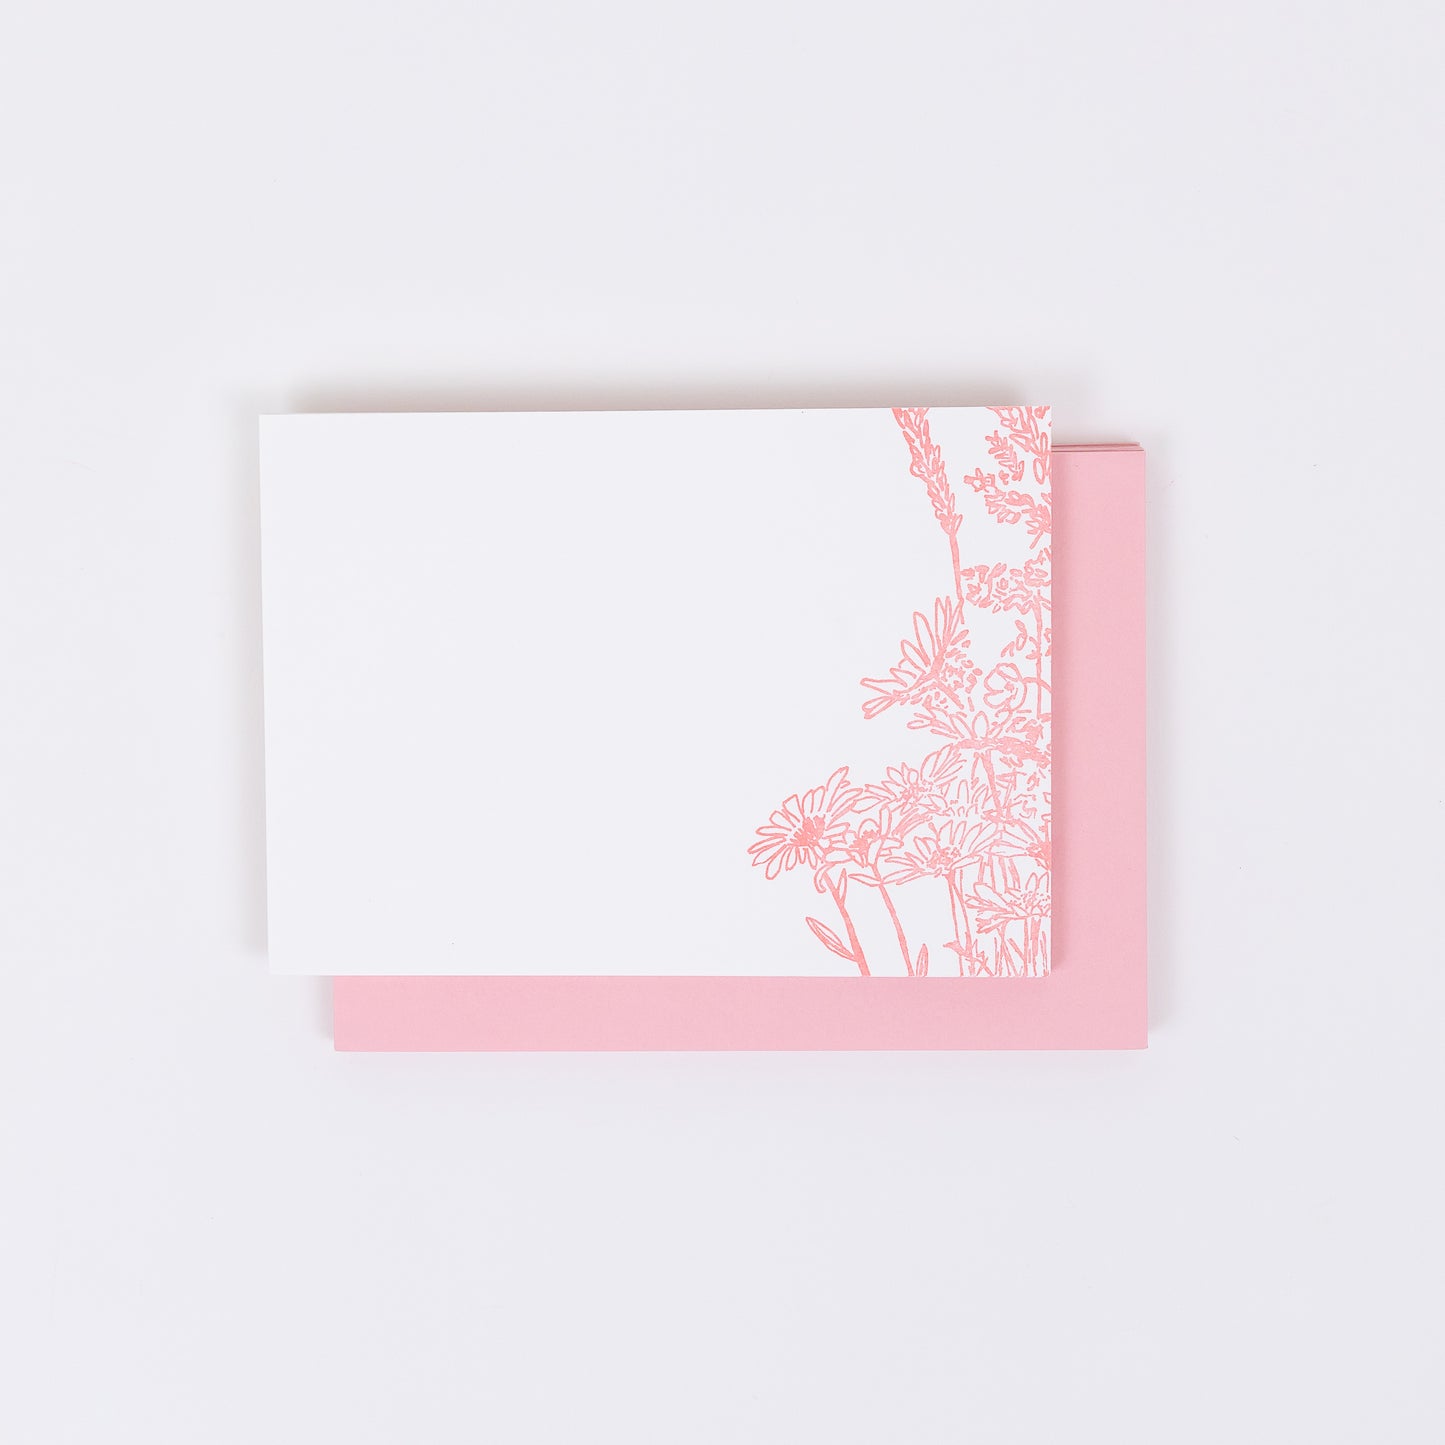 Set of 10 Letterpress Note Cards featuring a hand-drawn Wildflower Bouquet letterpress printed in a soft pink ink onto 100% cotton paper. Includes 10 soft pink envelopes. Size A6.  The cards are stacked on the envelopes shown on a white background.